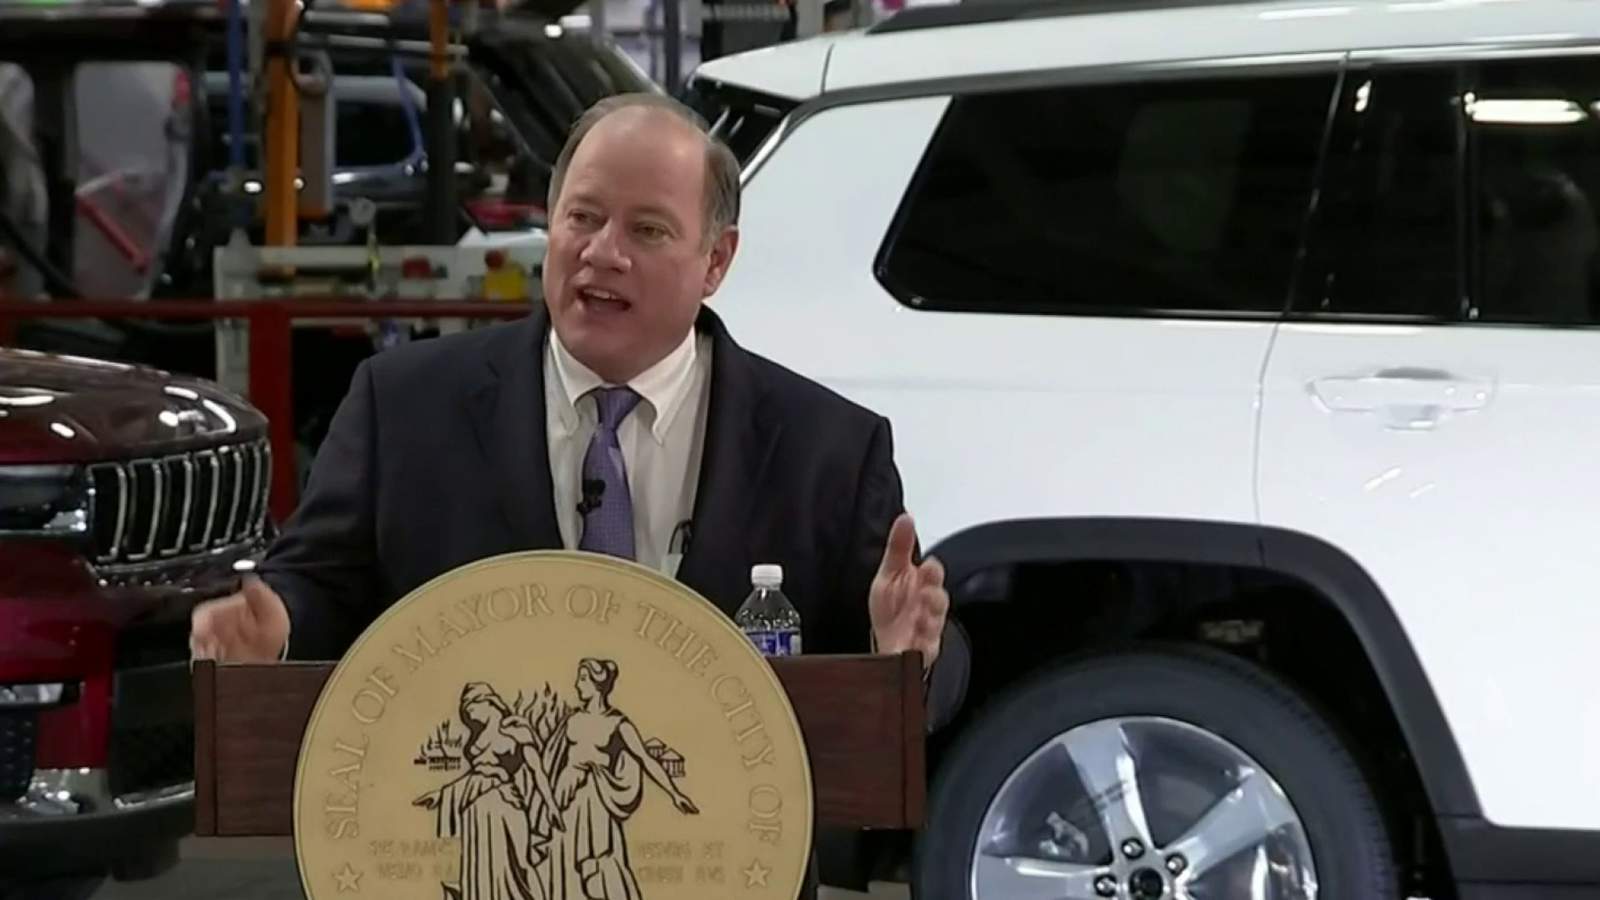 Detroit Mayor Duggan discusses equity, new COVID vaccination site in State of the City address